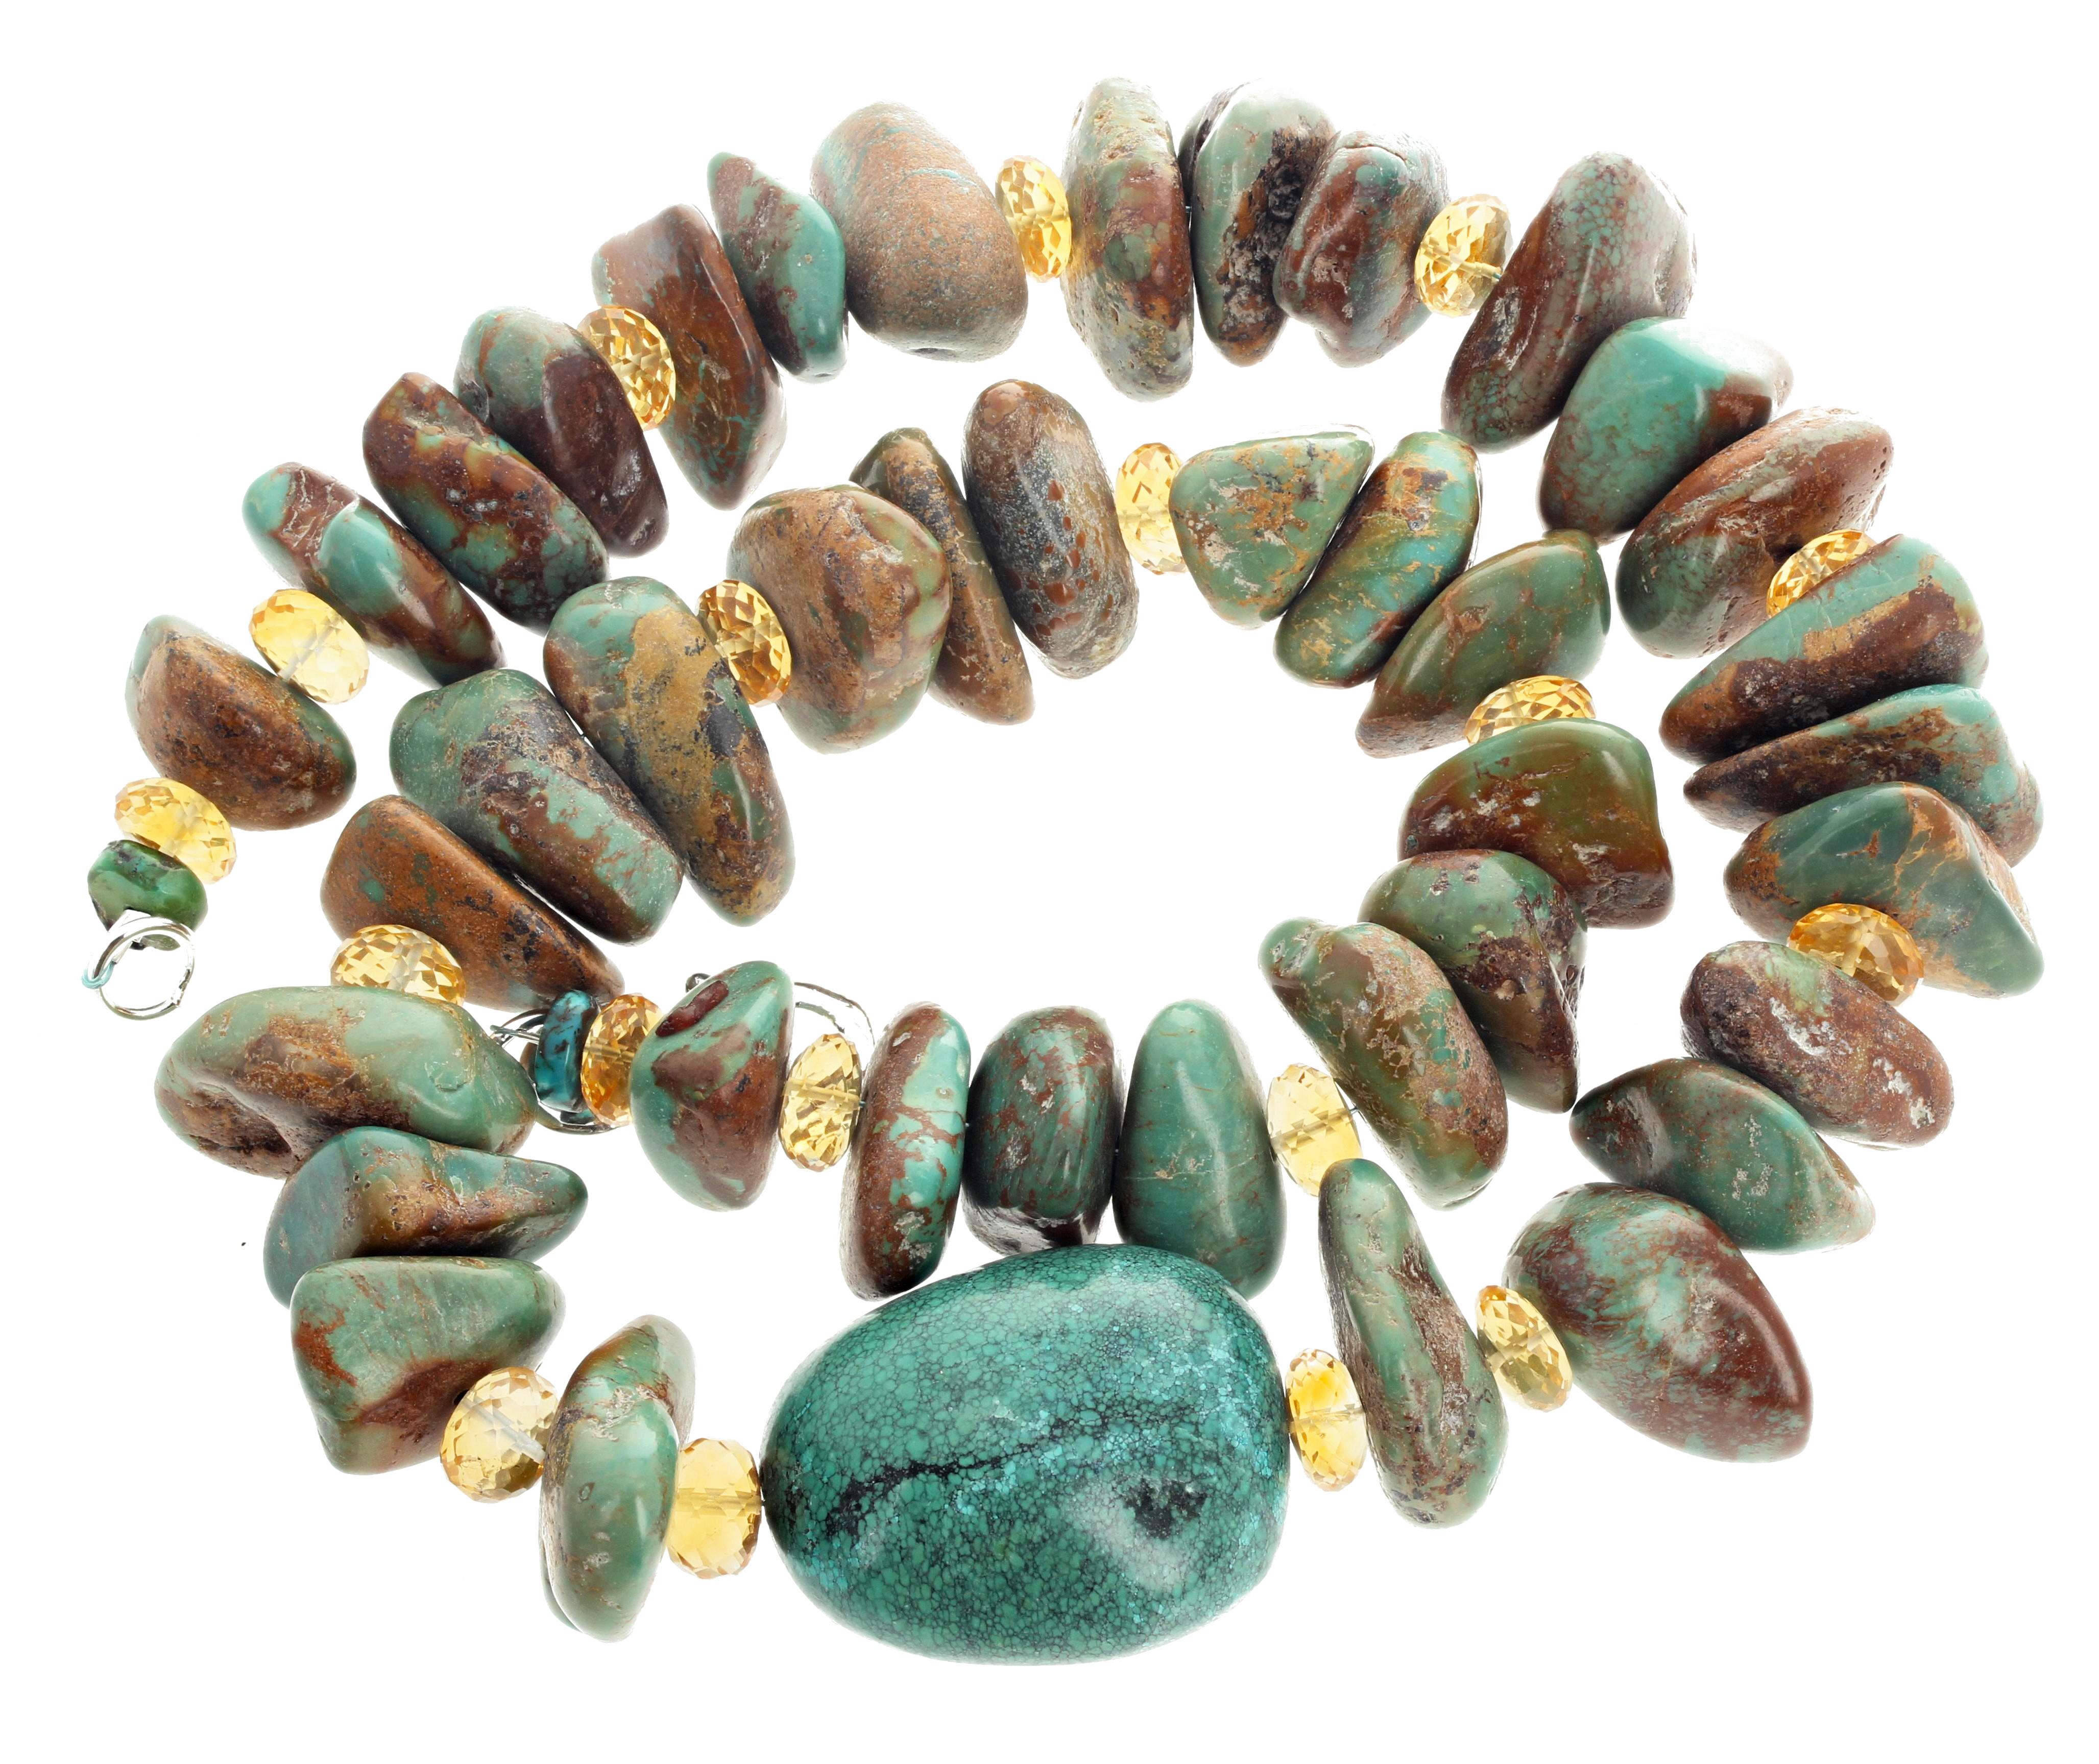 Amazing polished chunks of Turquoise from all over the world, enhanced with sparkling gem cut Citrine rondels, form this 21.5 inch long handmade necklace. with a hook clasp. The center Turquoise is 34 mm x 17 mm.  